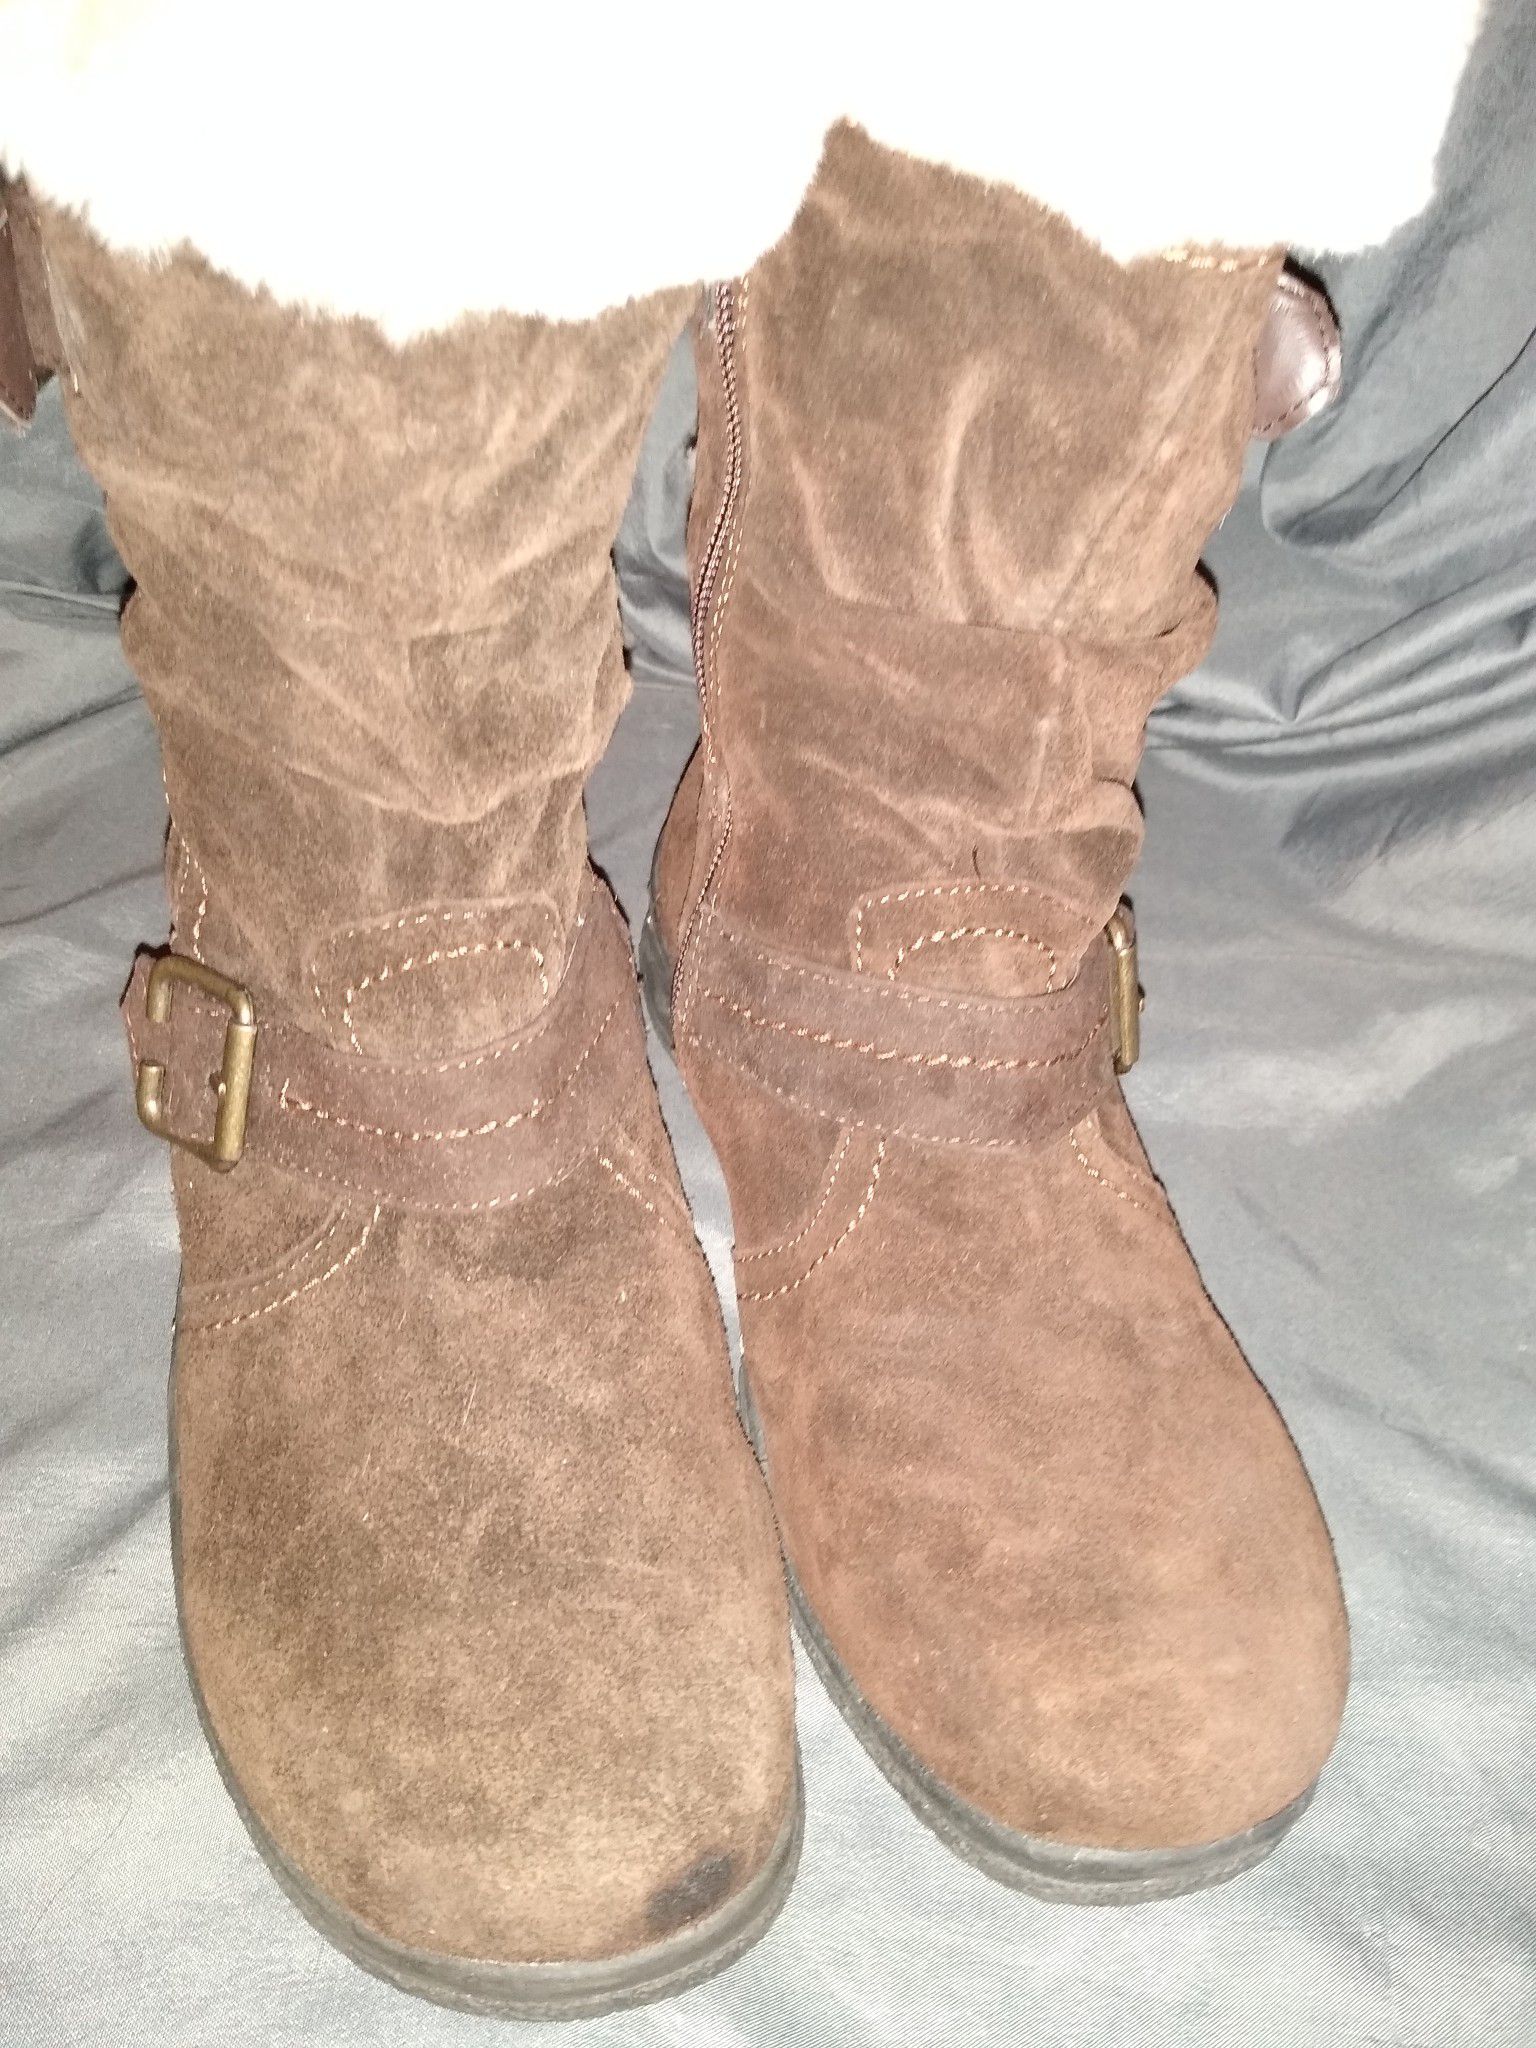 Brown suede zip up boots with faux fur size 8 by Earth Spirit